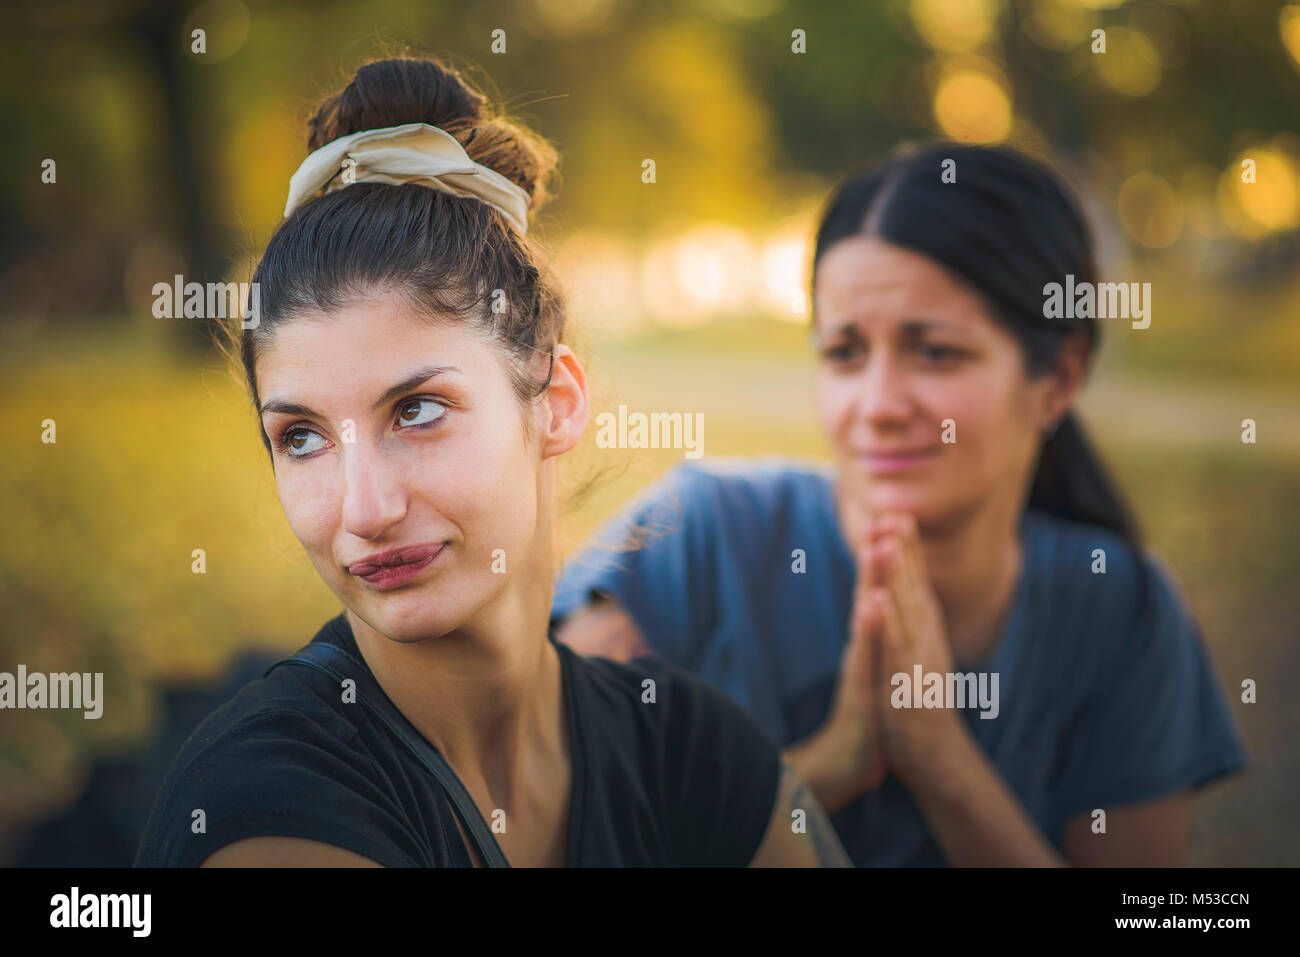 Two women having a relationship issue Stock Photo